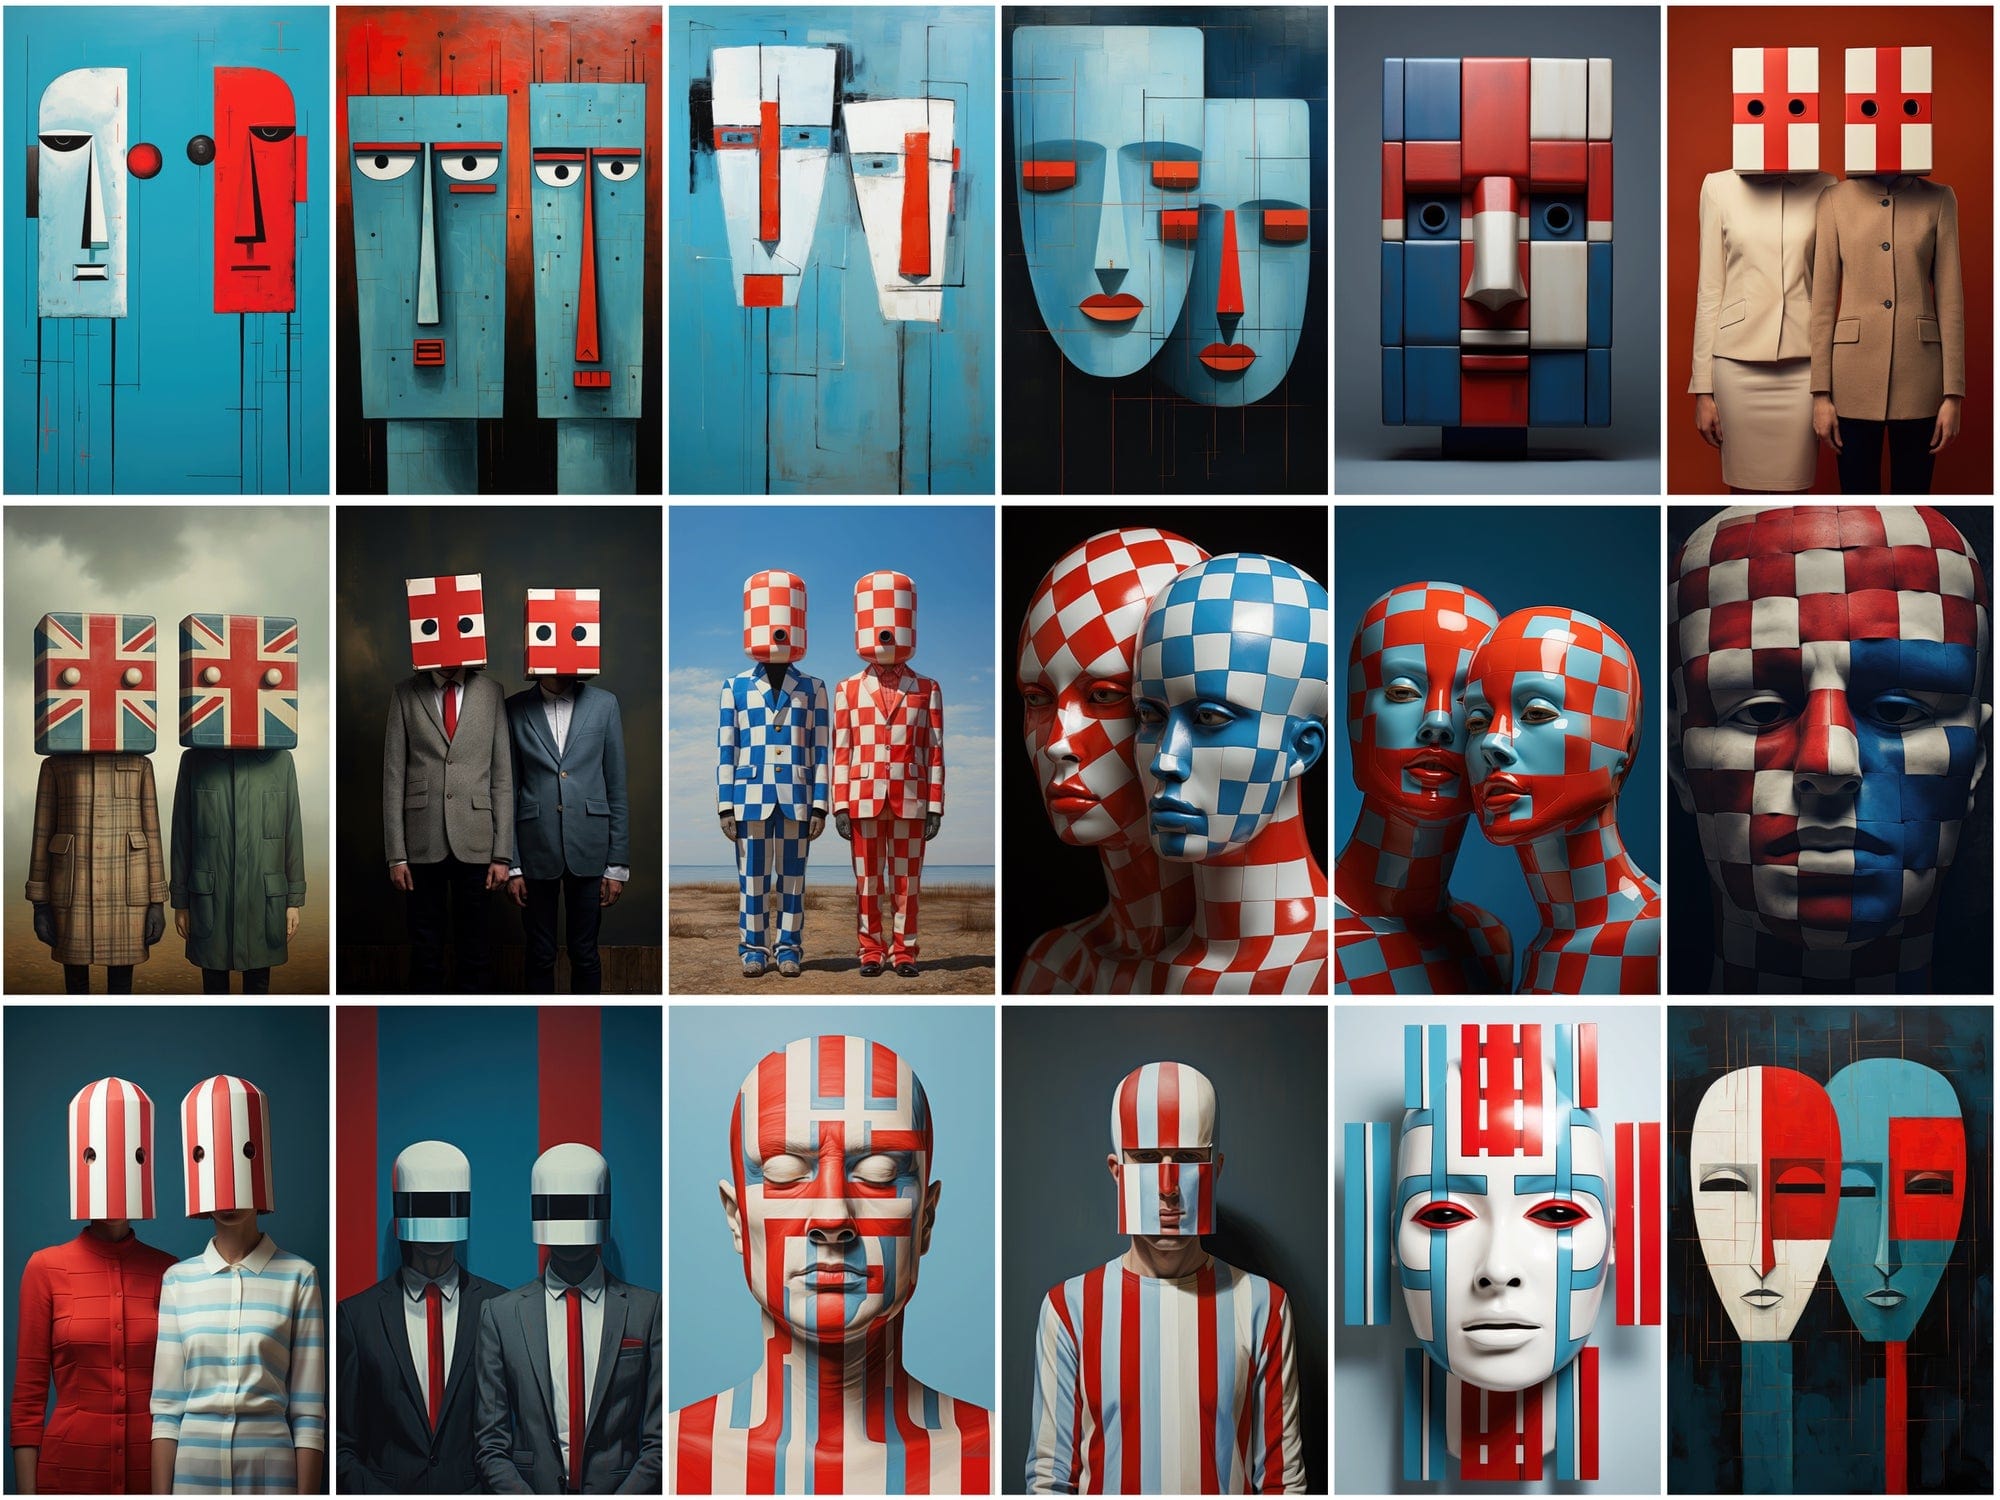 210 Wall Art PNG Images - Colorful Square Heads, Red and Blue Accents, Minimal Line Art, Commercial License Included Digital Download Sumobundle